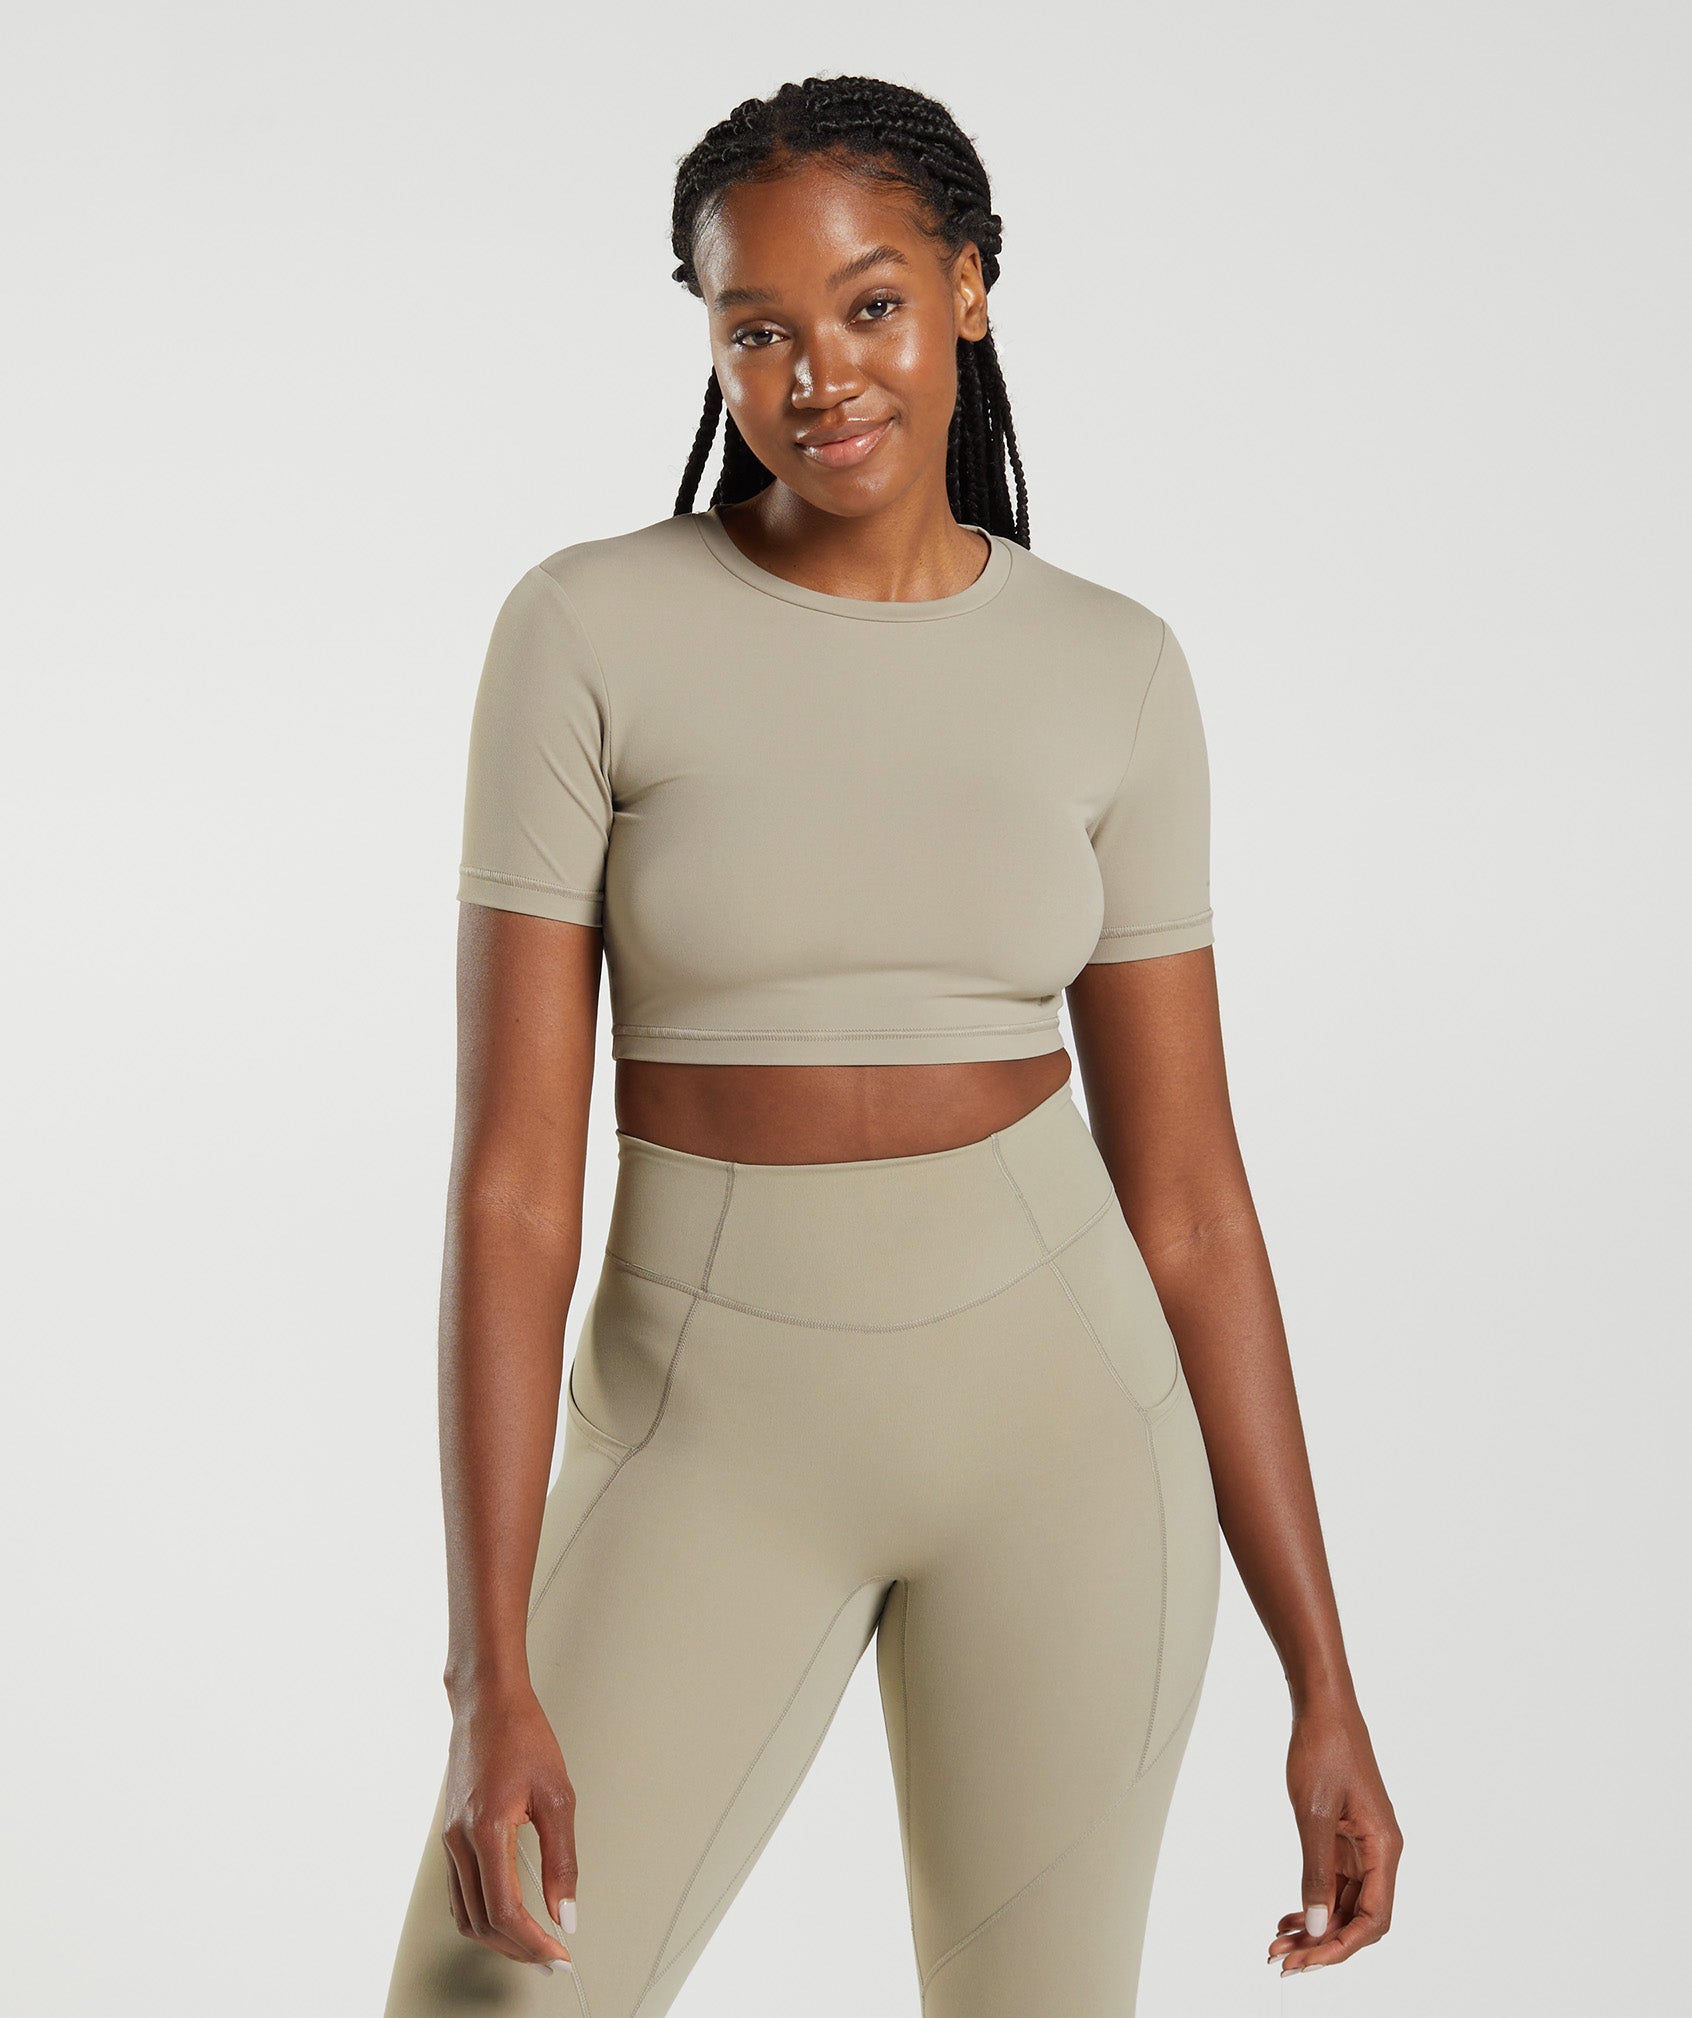 Gymshark Whitney Simmons Brown Size XS - $38 - From Angela